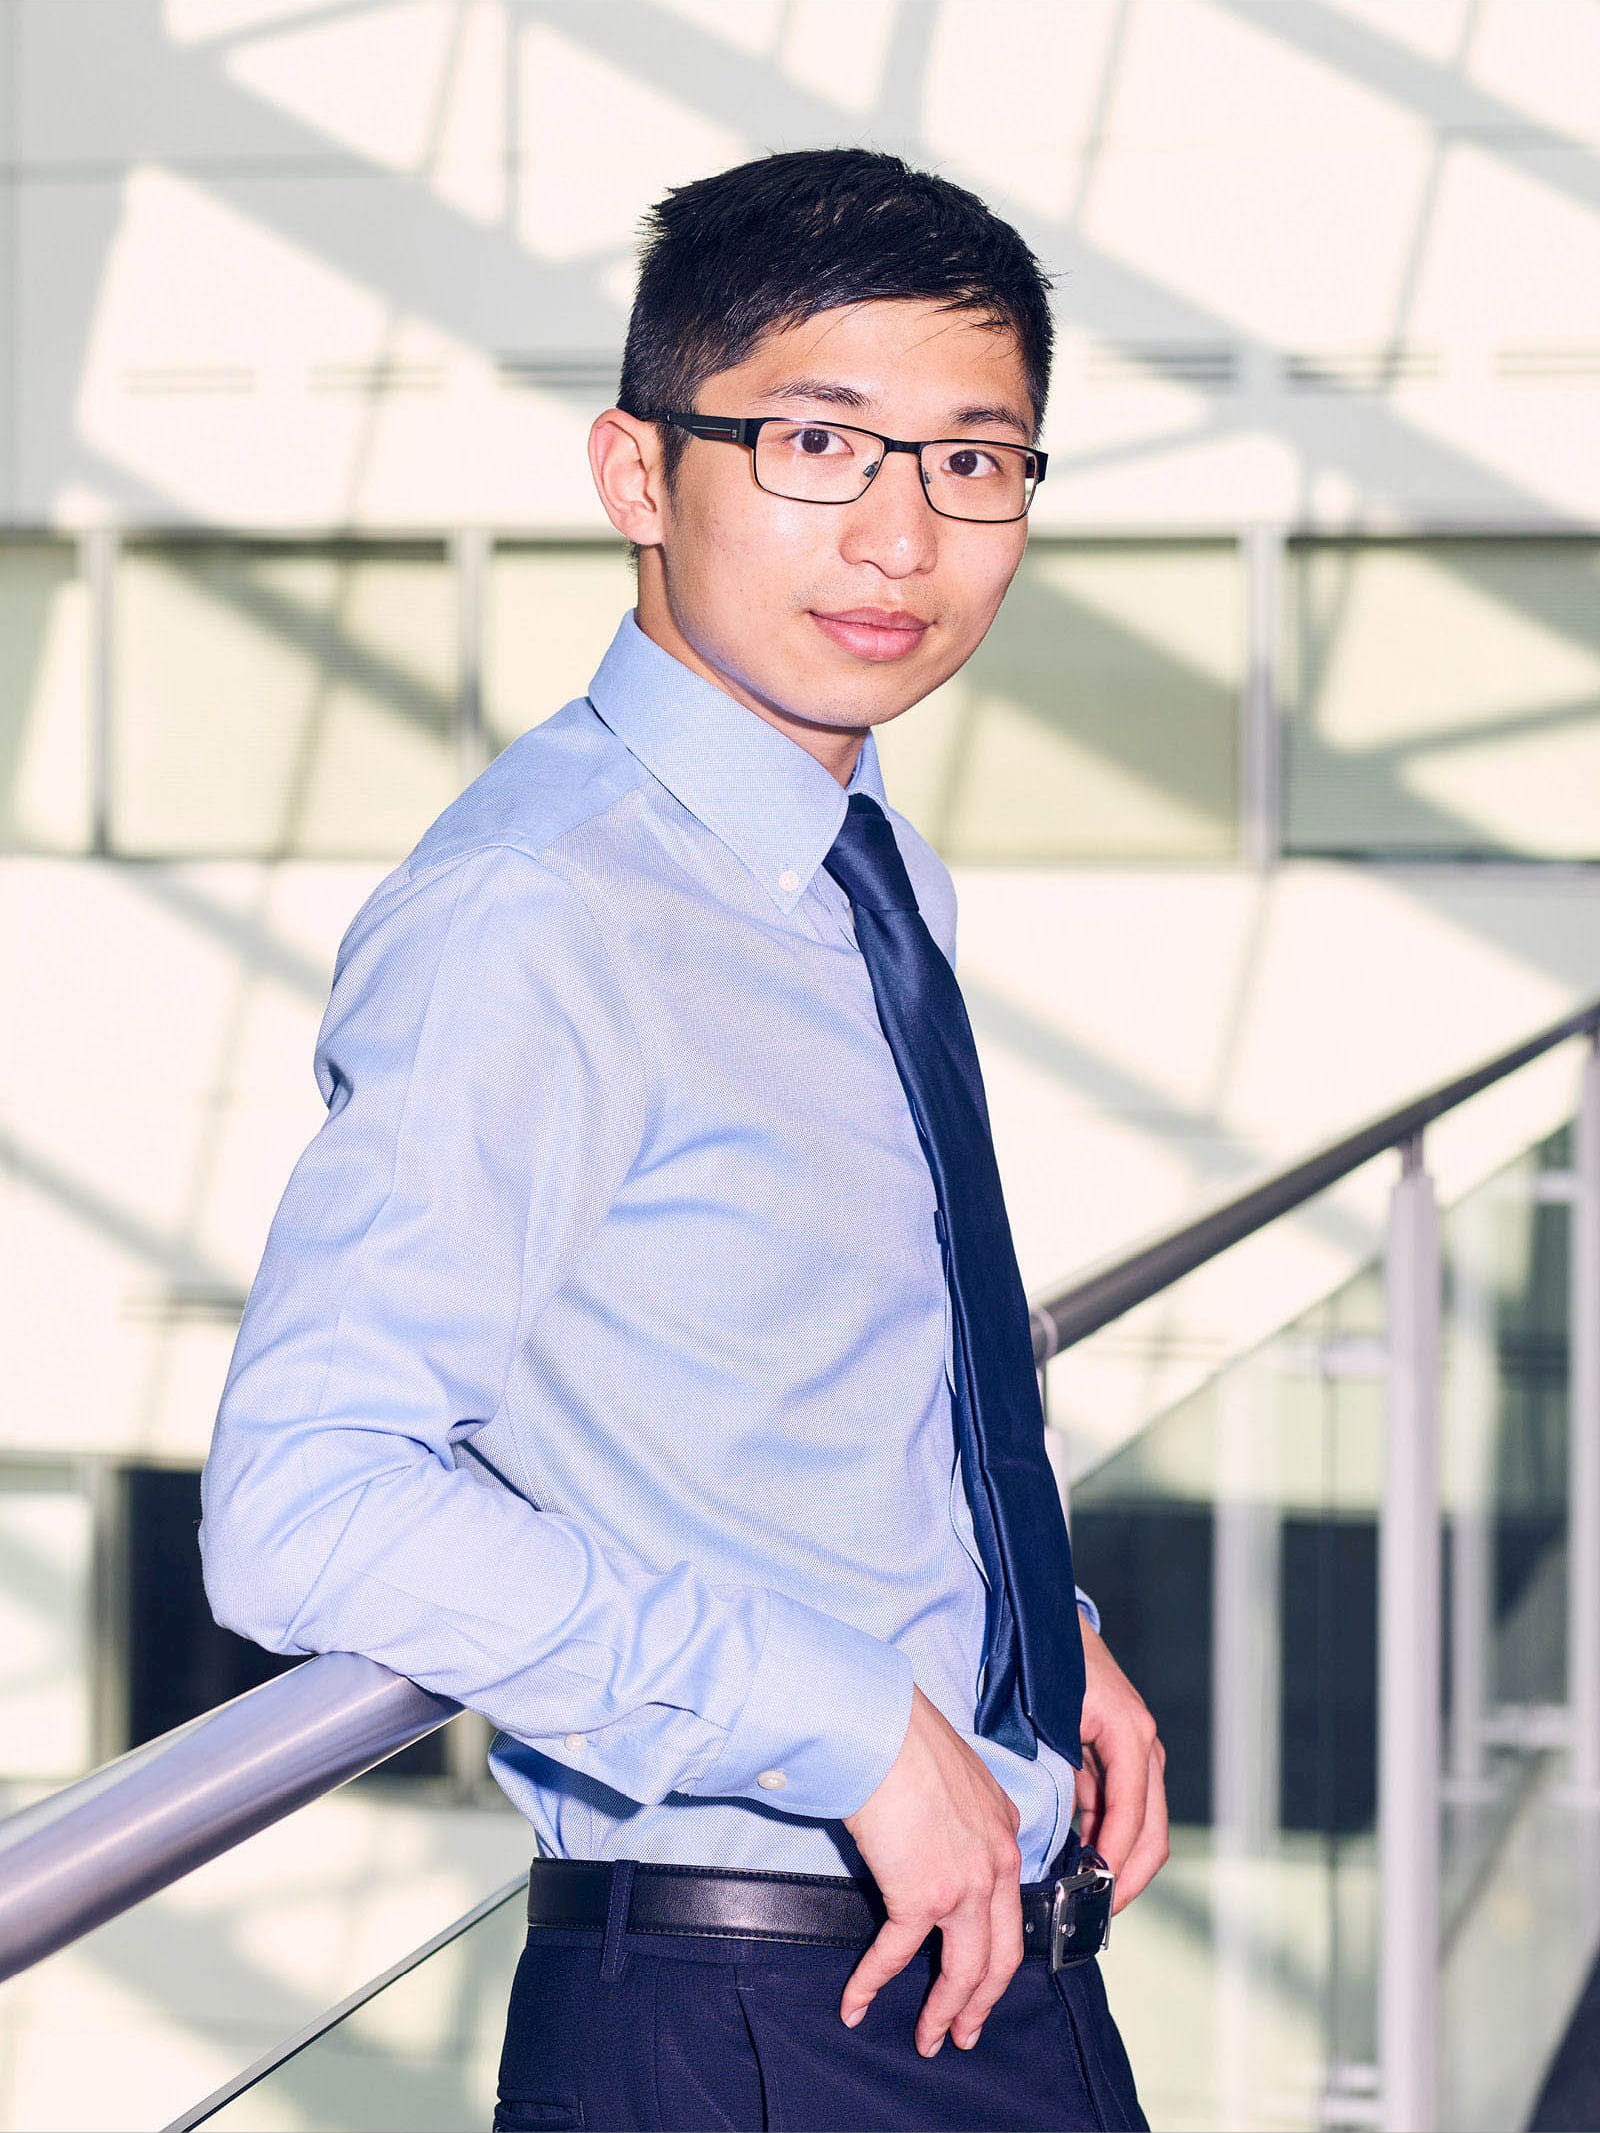 ICAEW Student Insights membership journey Chris Chung young man glasses shirt tie ACA